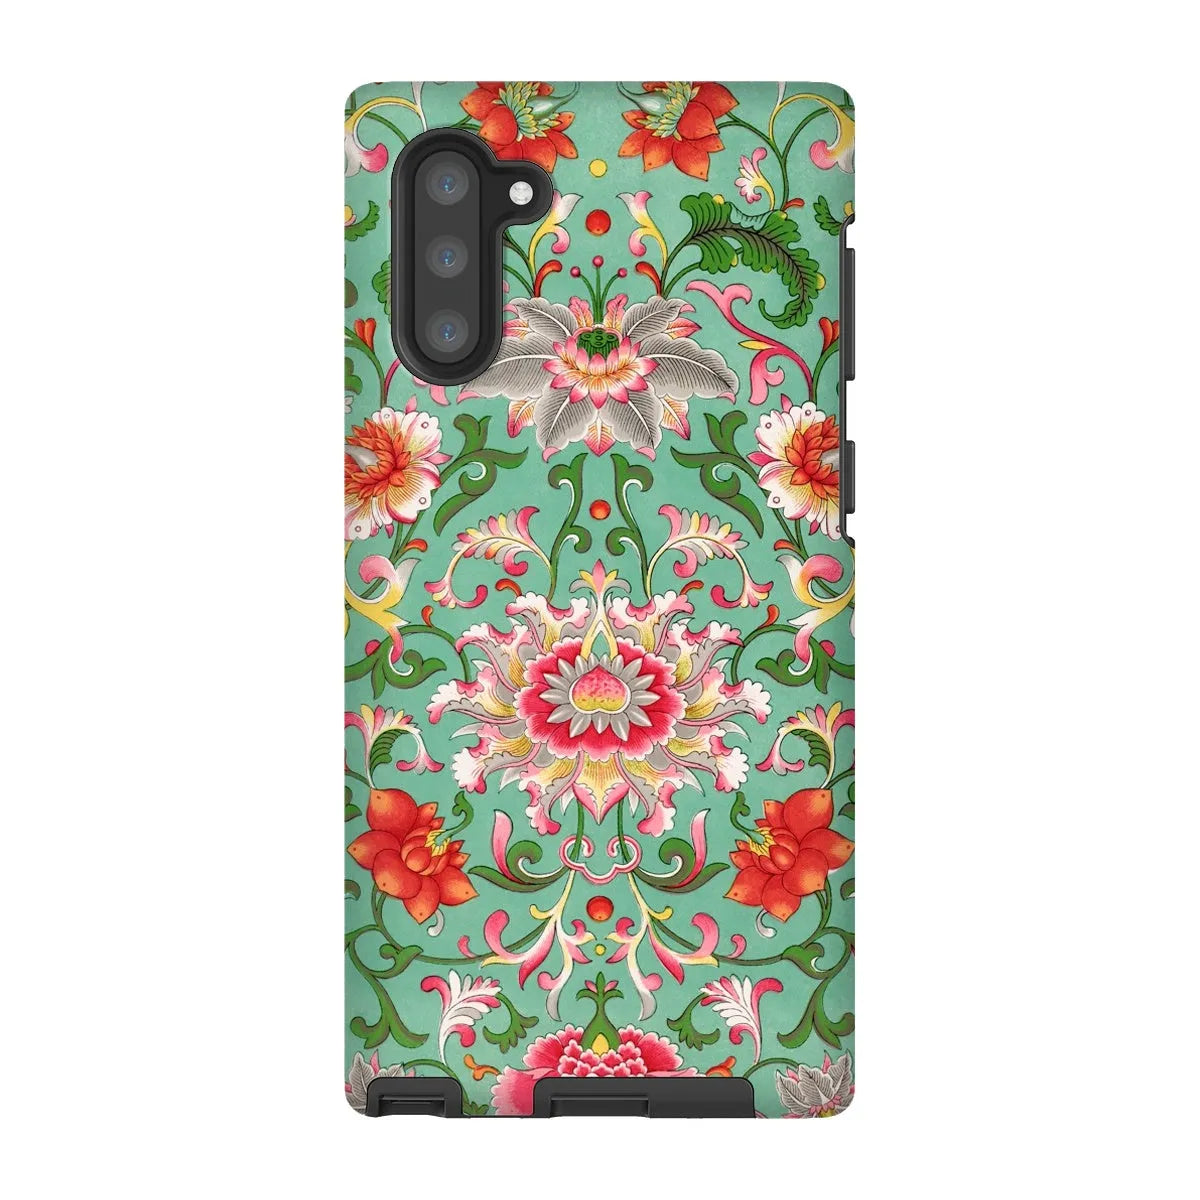 Chinese Floral Aesthetic Art Phone Case - Owen Jones - Samsung Galaxy Note 10 / Matte - Mobile Phone Cases - Aesthetic